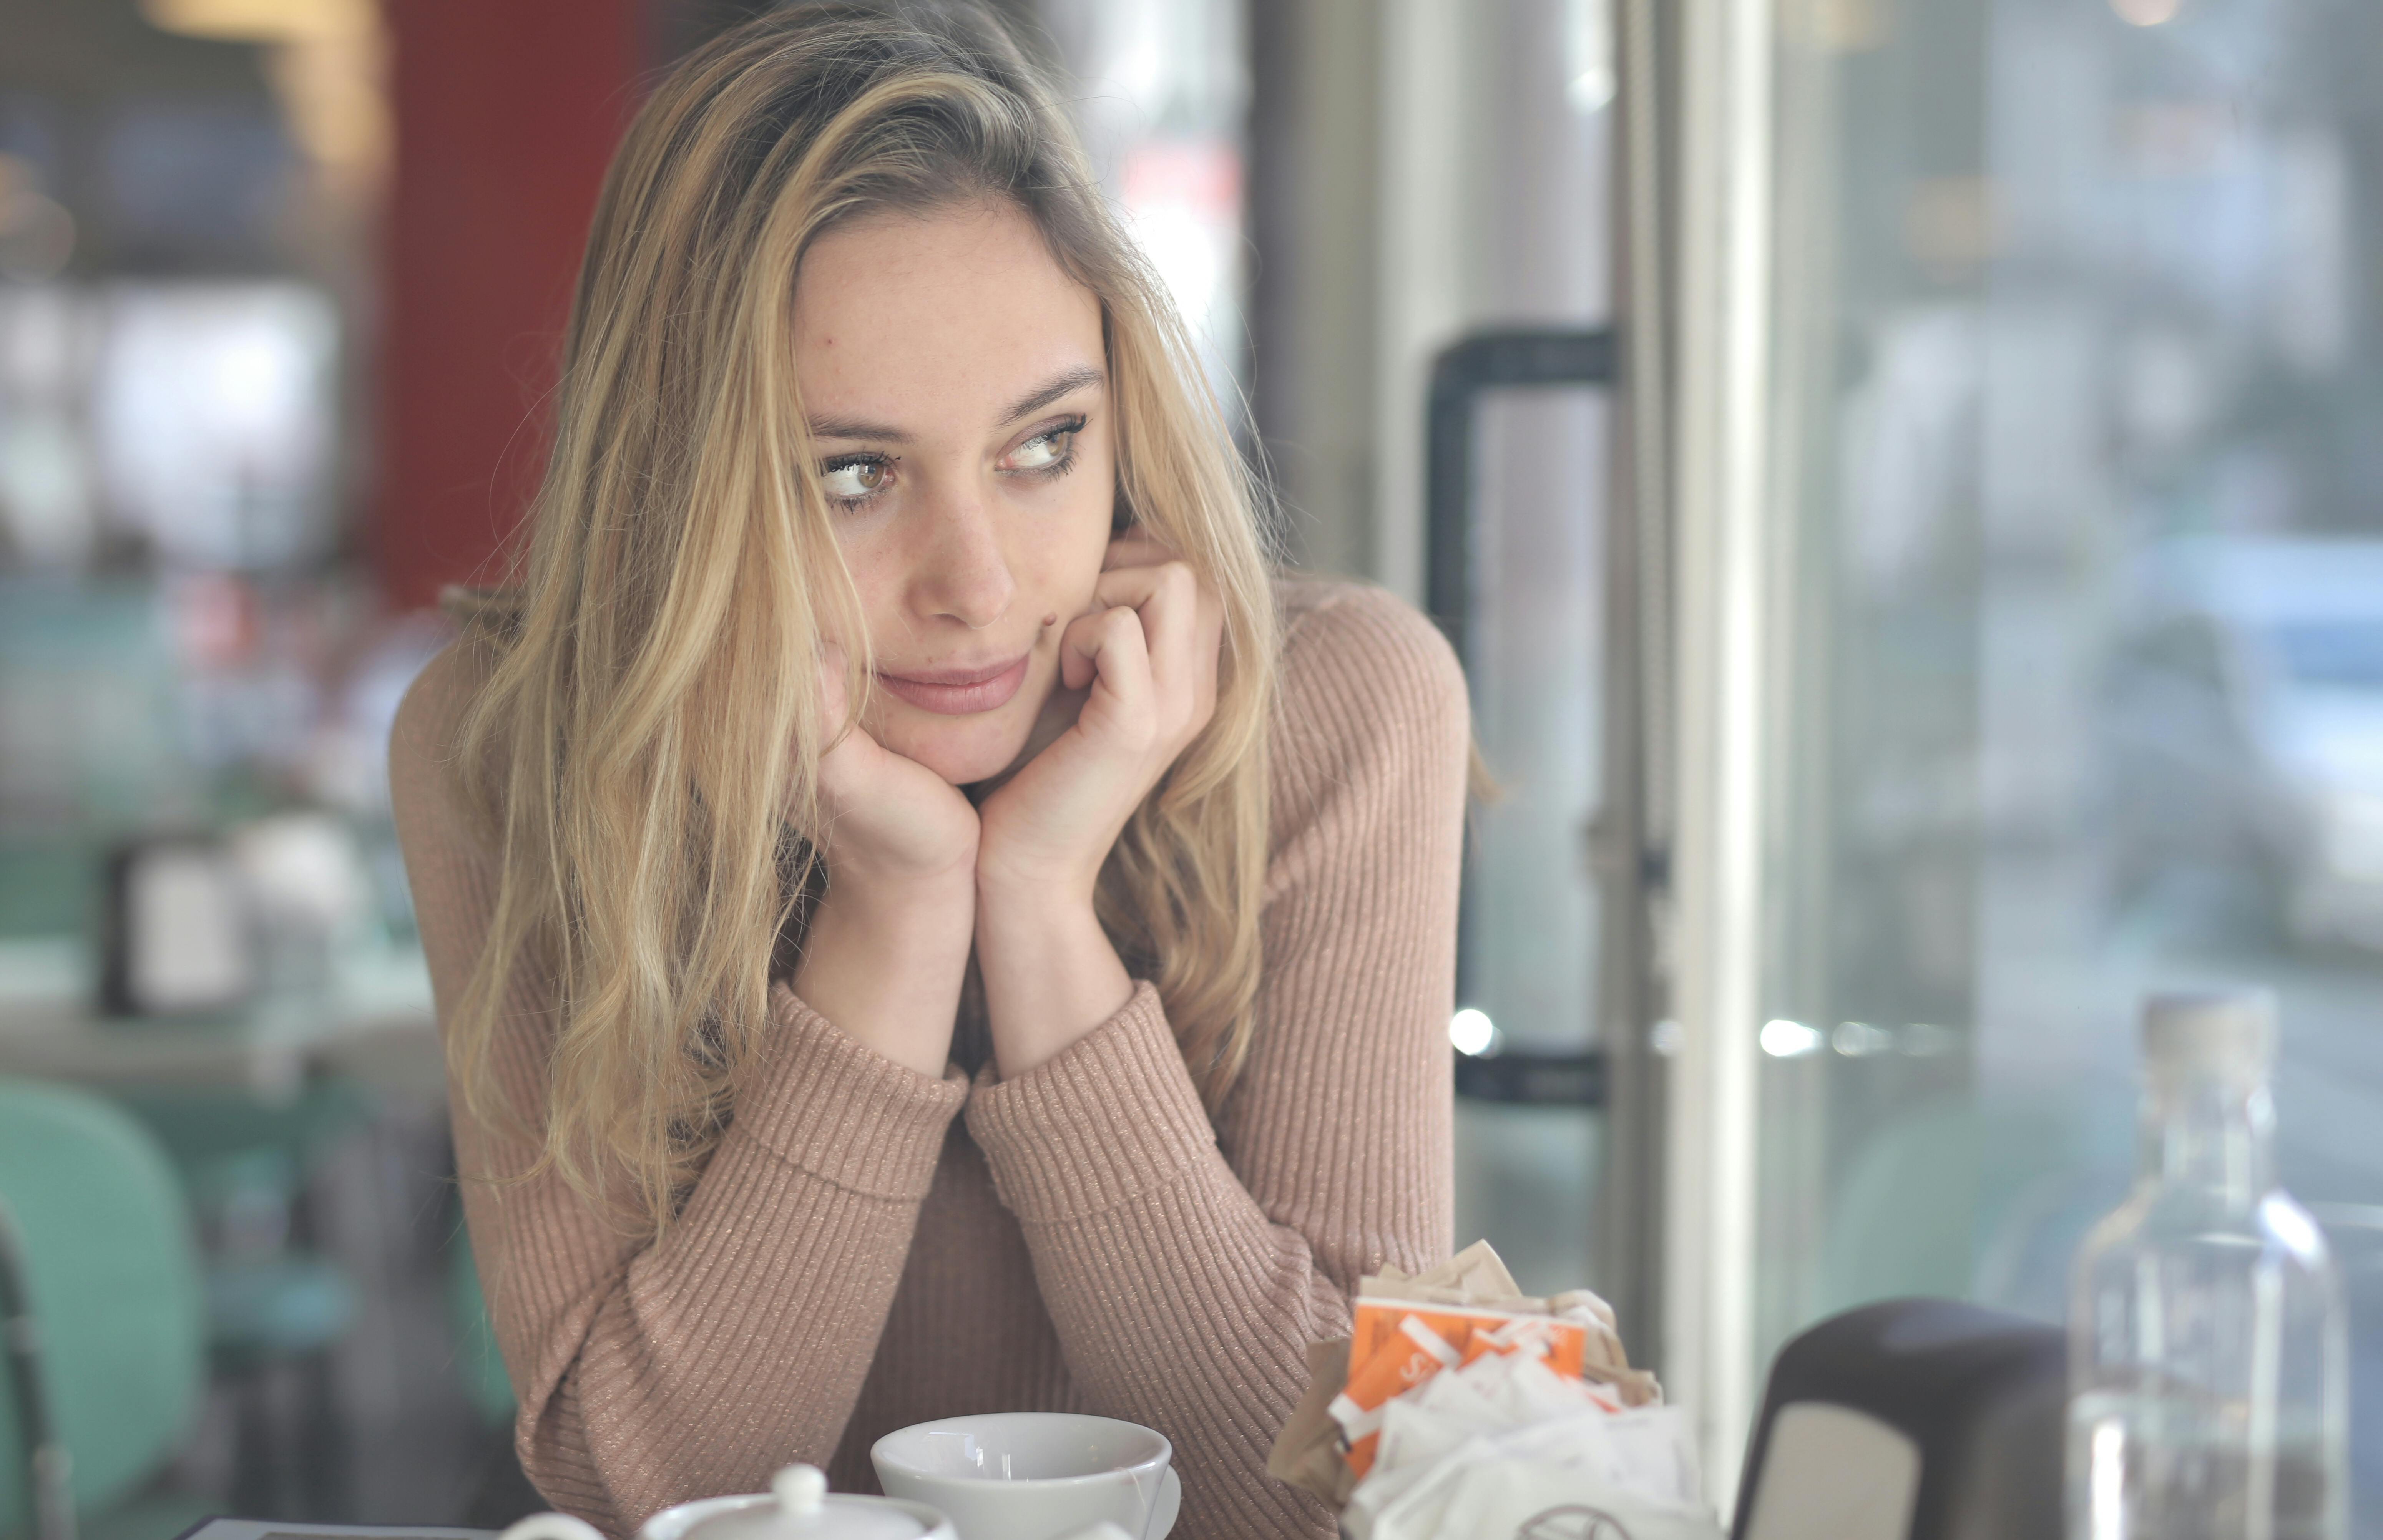 Woman in Brown Sweater Sitting by the Table | Source: Pexels